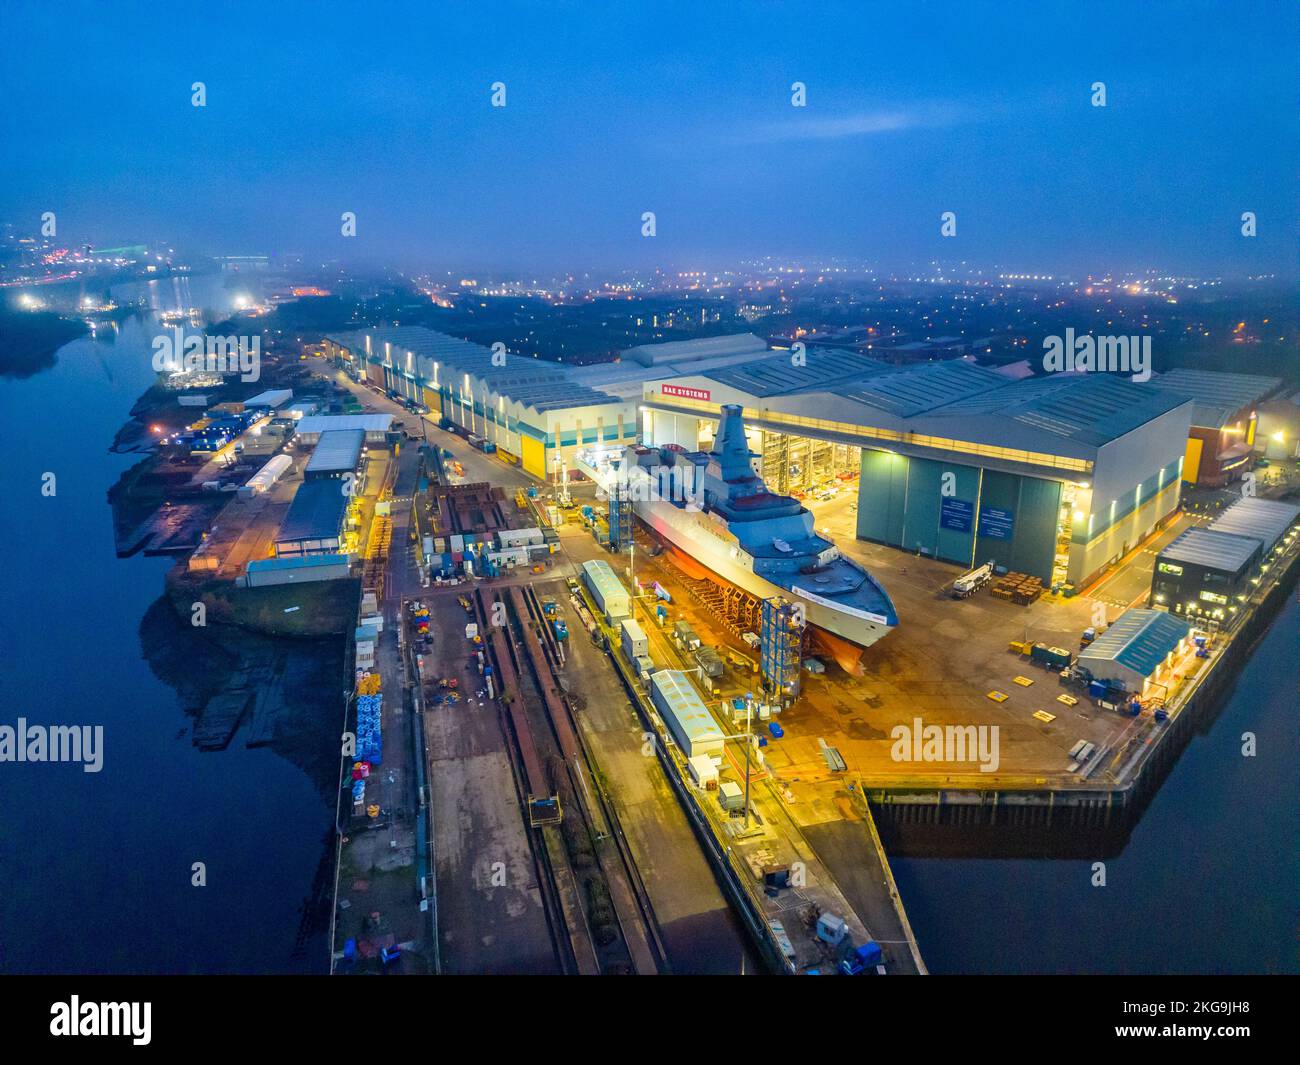 Glasgow, Scotland, UK. 22 November 2022. Aerial view of HMS Glasgow at BAE Systems Govan shipyard  just before being transferred by barge to nearby Scotstoun shipyard on the River Clyde. The ship is a Type 26 anti-submarine frigate.  Iain Masterton/Alamy Live News Stock Photo